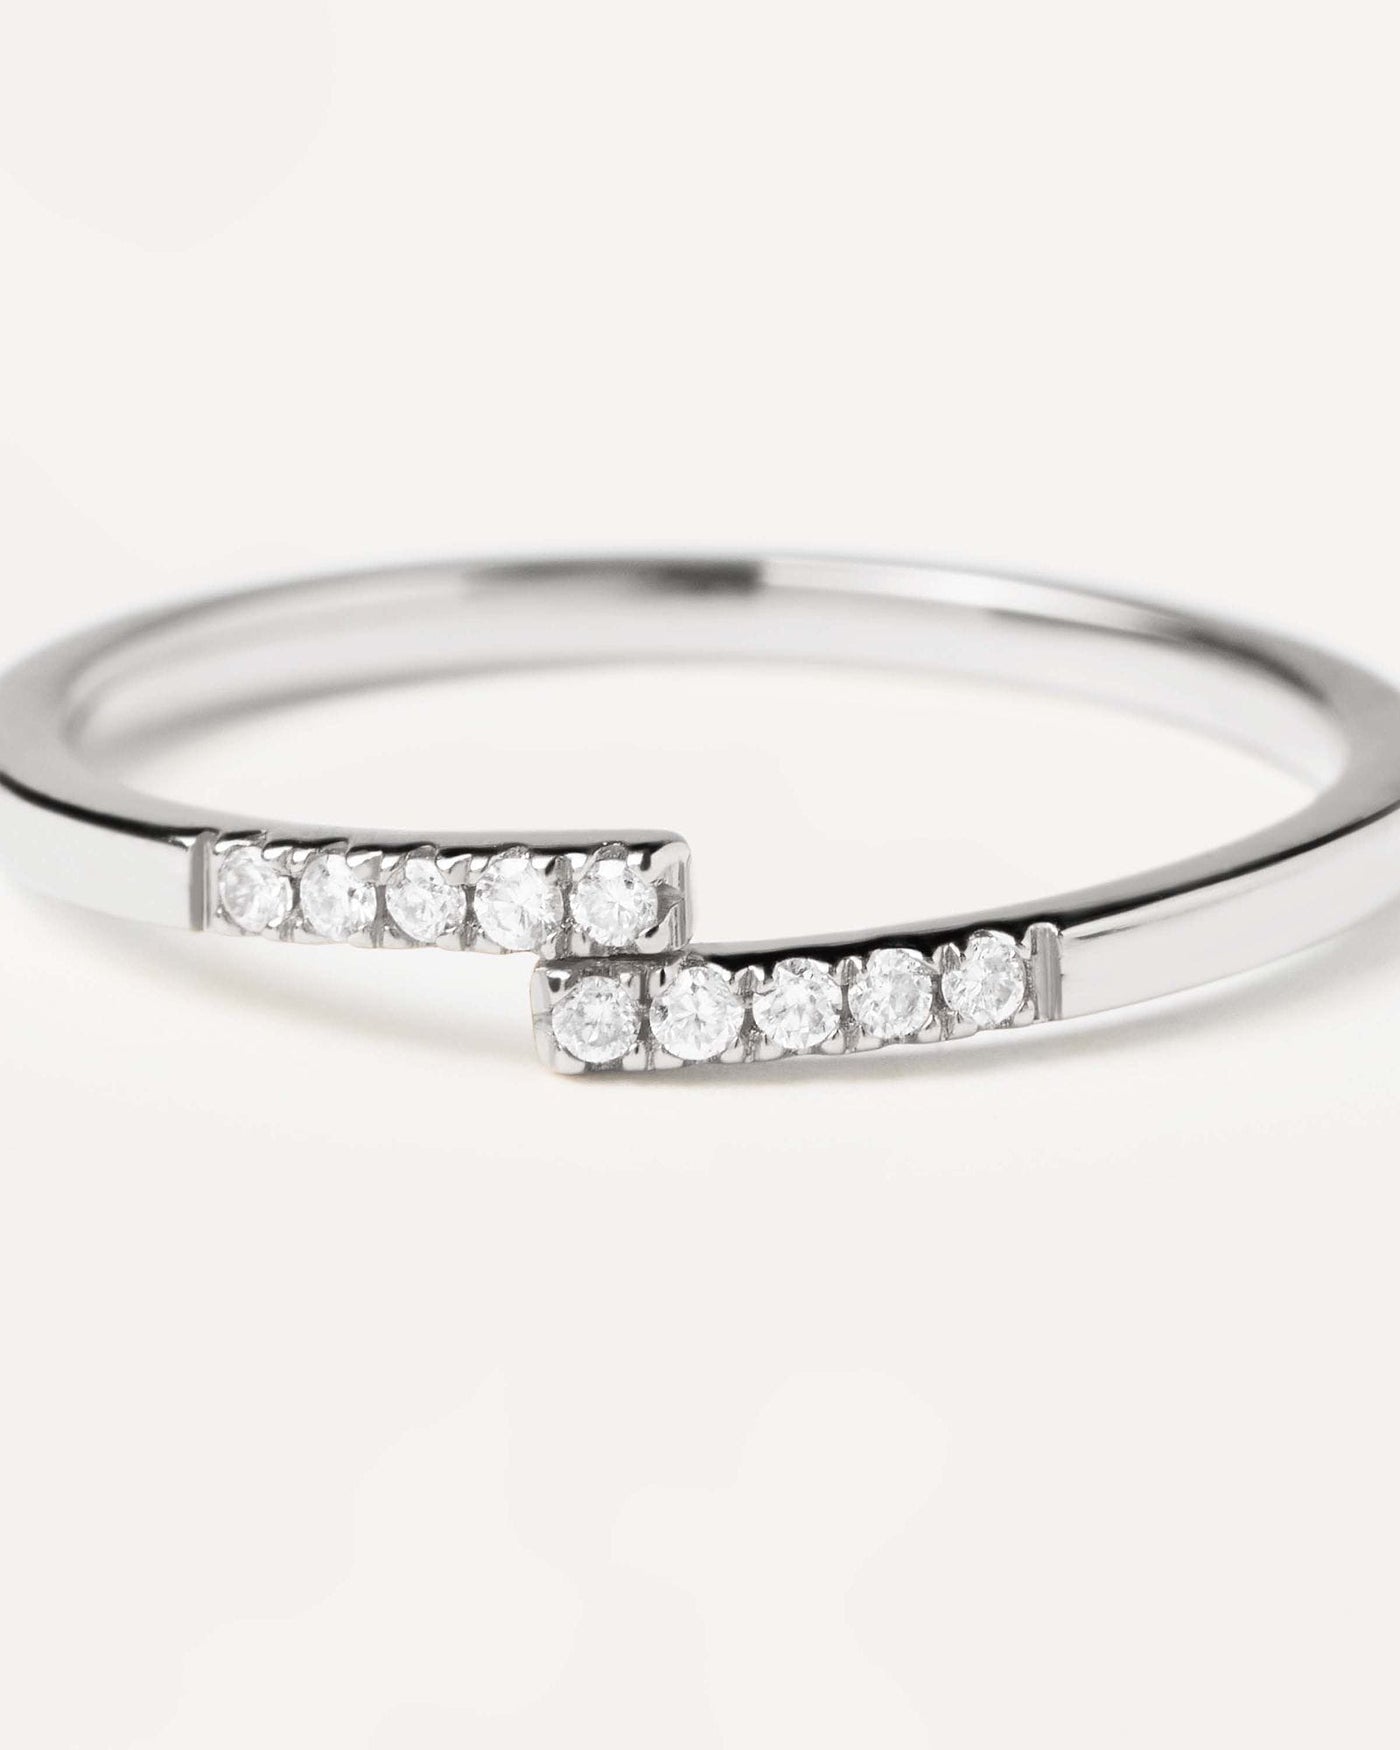 2024 Selection | Diamonds and White Gold Cross Ring. 18K white gold ring with 10 dainty diamonds meeting at the middle, equaling 0.06 carats. Get the latest arrival from PDPAOLA. Place your order safely and get this Best Seller. Free Shipping.